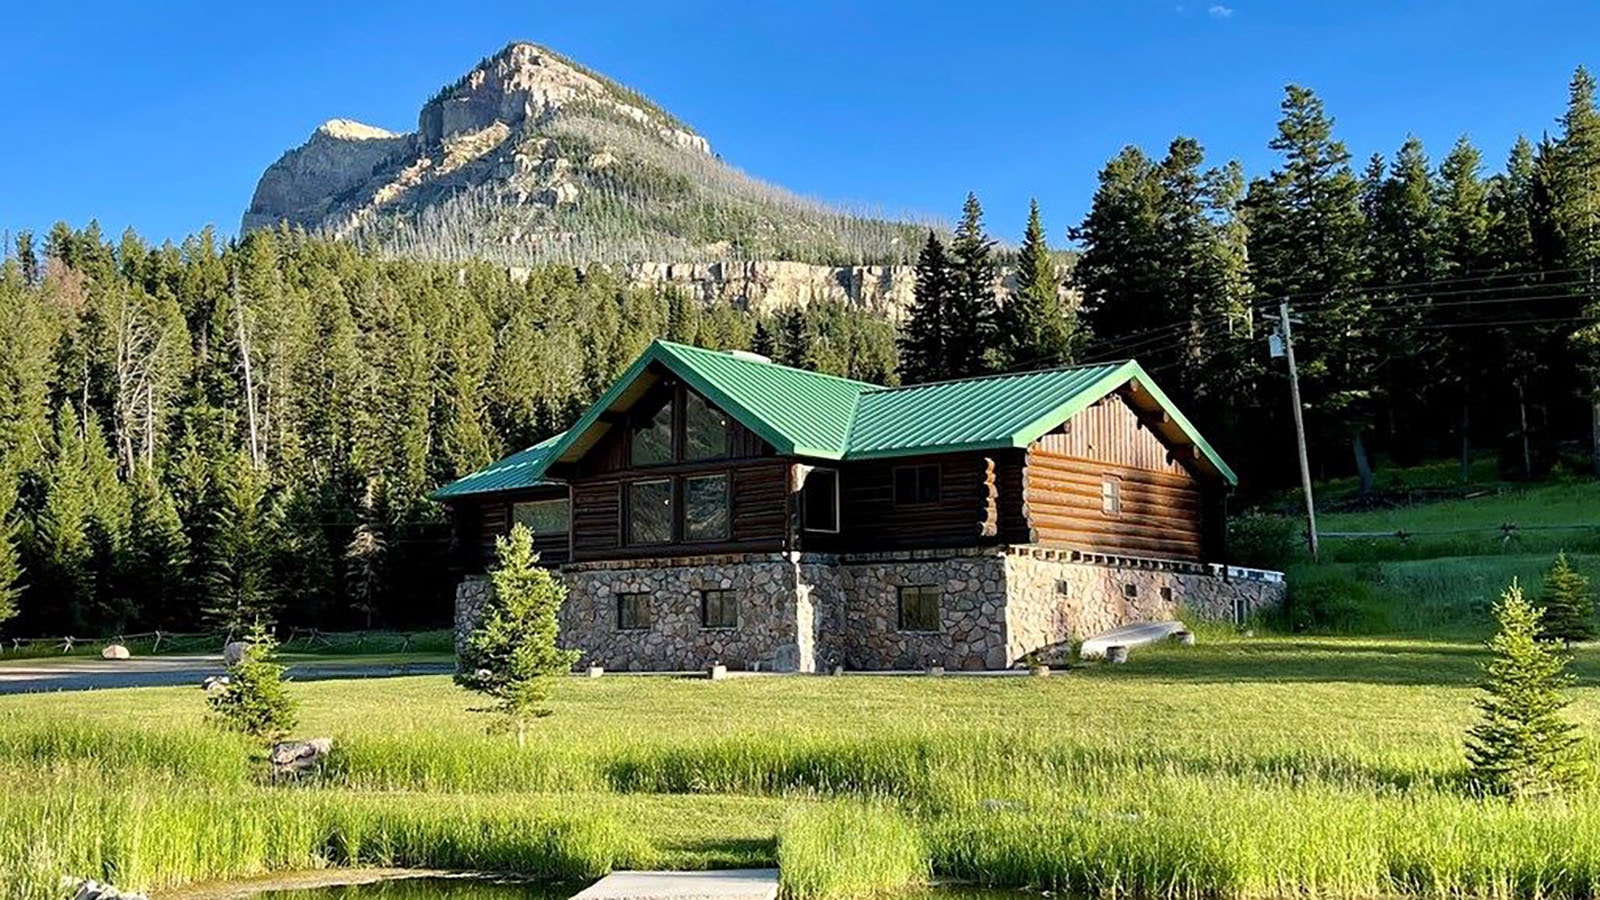 Richard Realty has listed a 63-acre property an hour’s drive from Cody along the Chief Joseph Scenic Highway for $13.5 million.